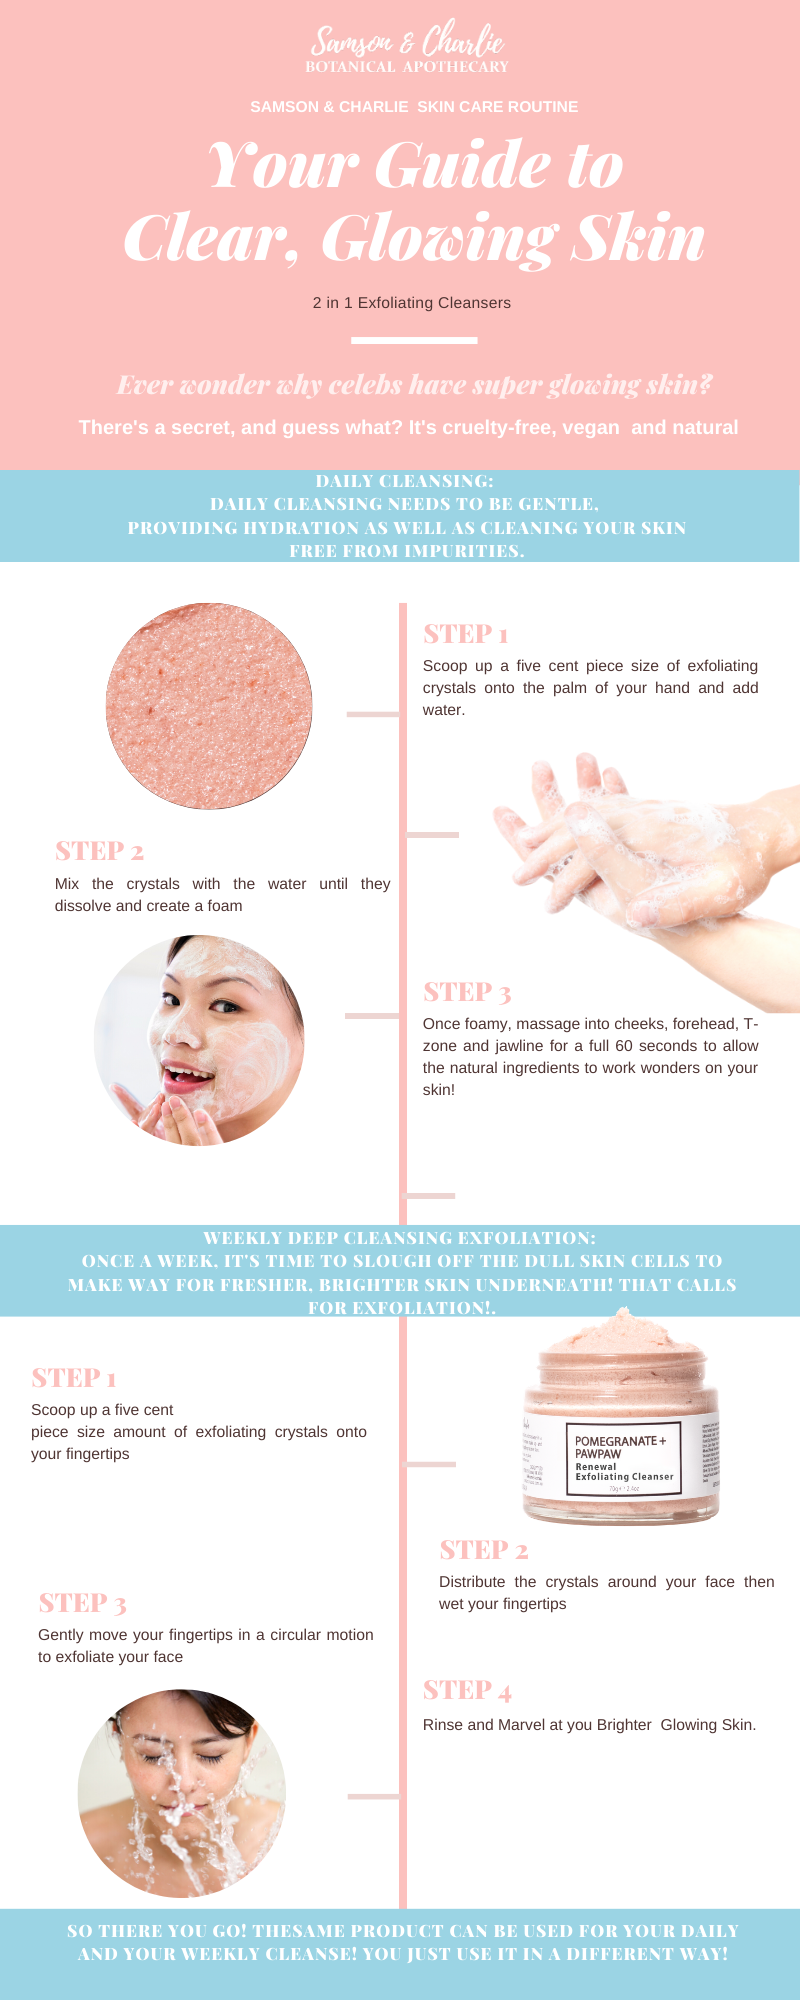 How to exfoliate and cleanse for glowing skin 